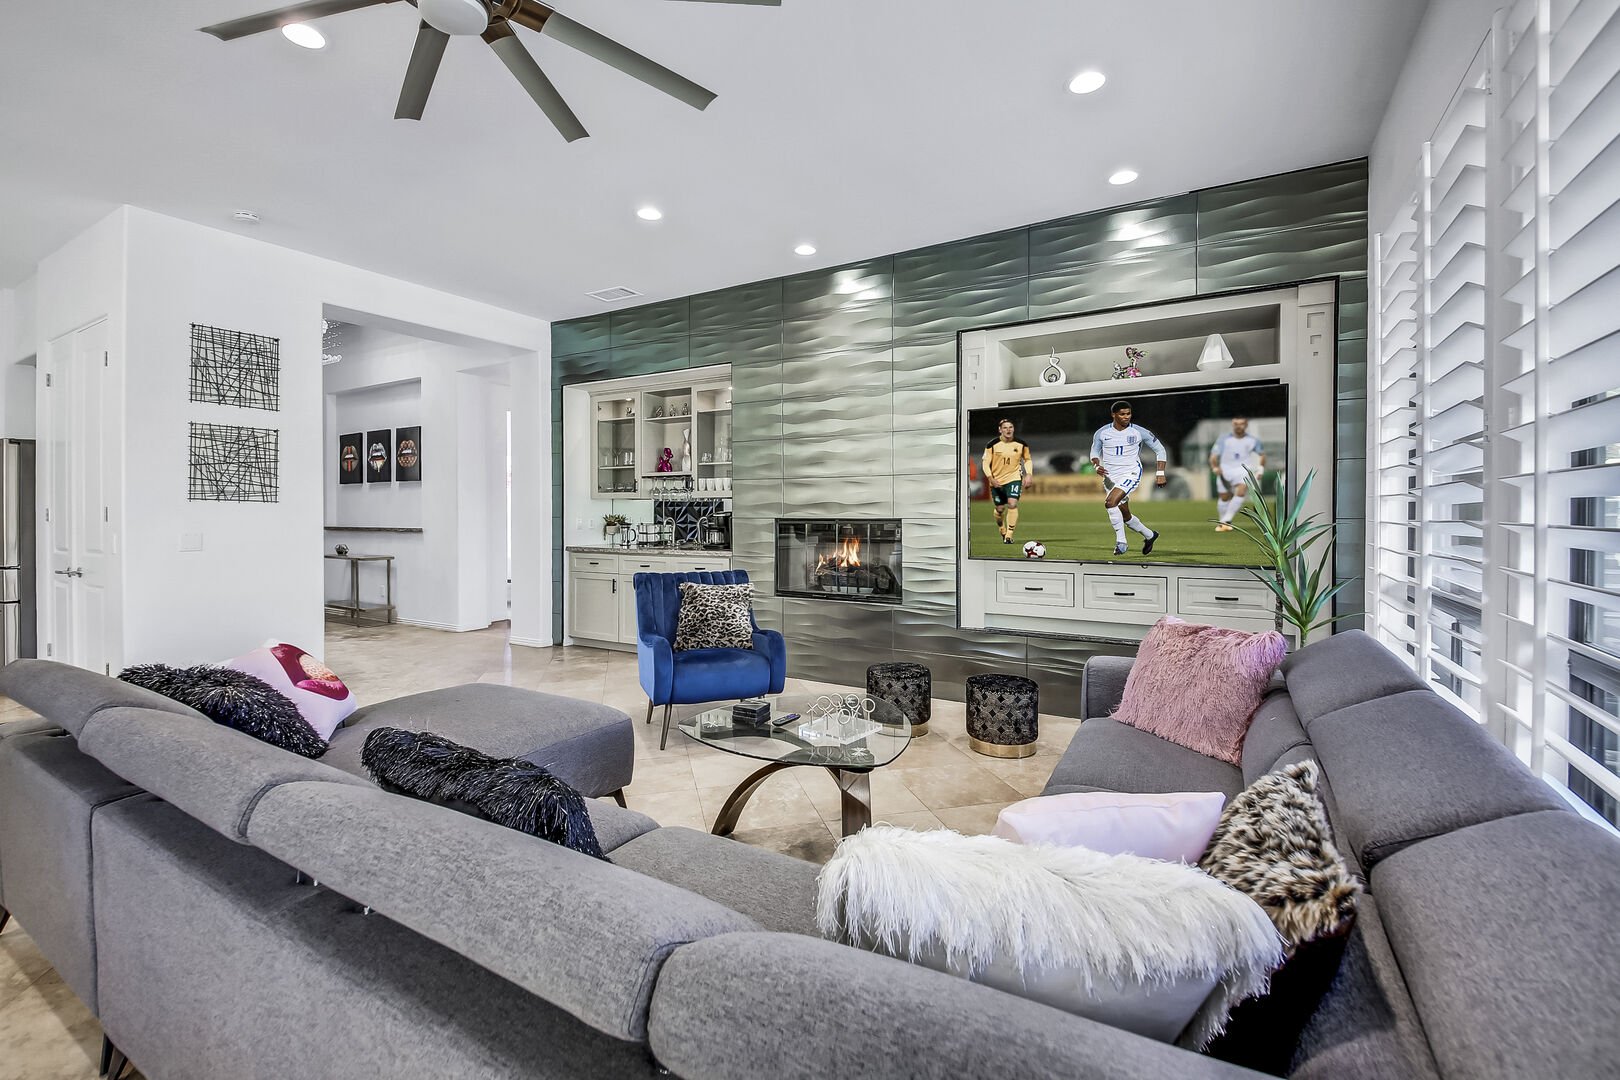 Relax near the natural gas fireplace and remote-controlled ceiling fan.